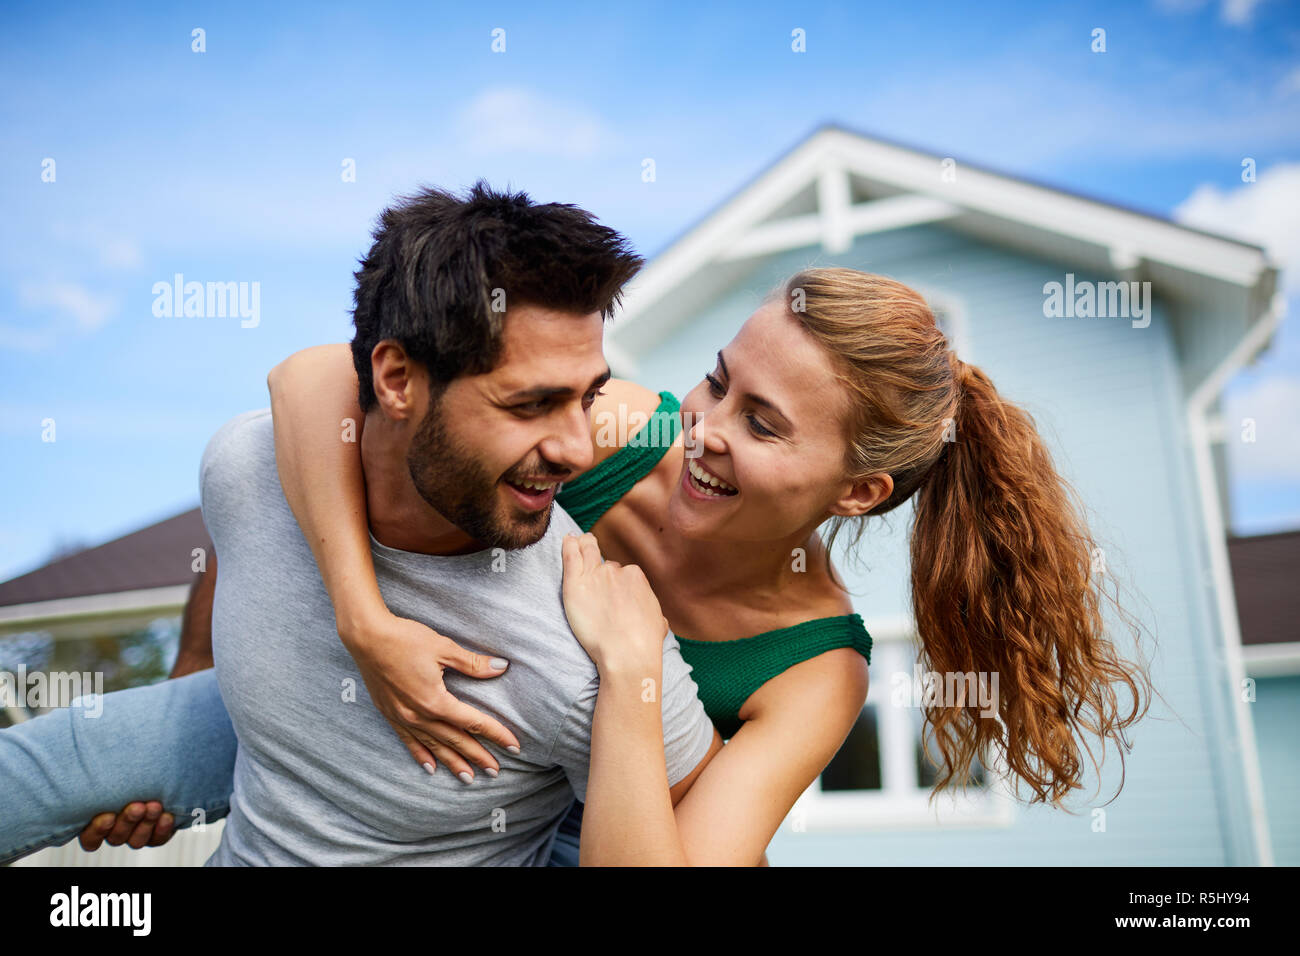 Outdoor embrace Stock Photo